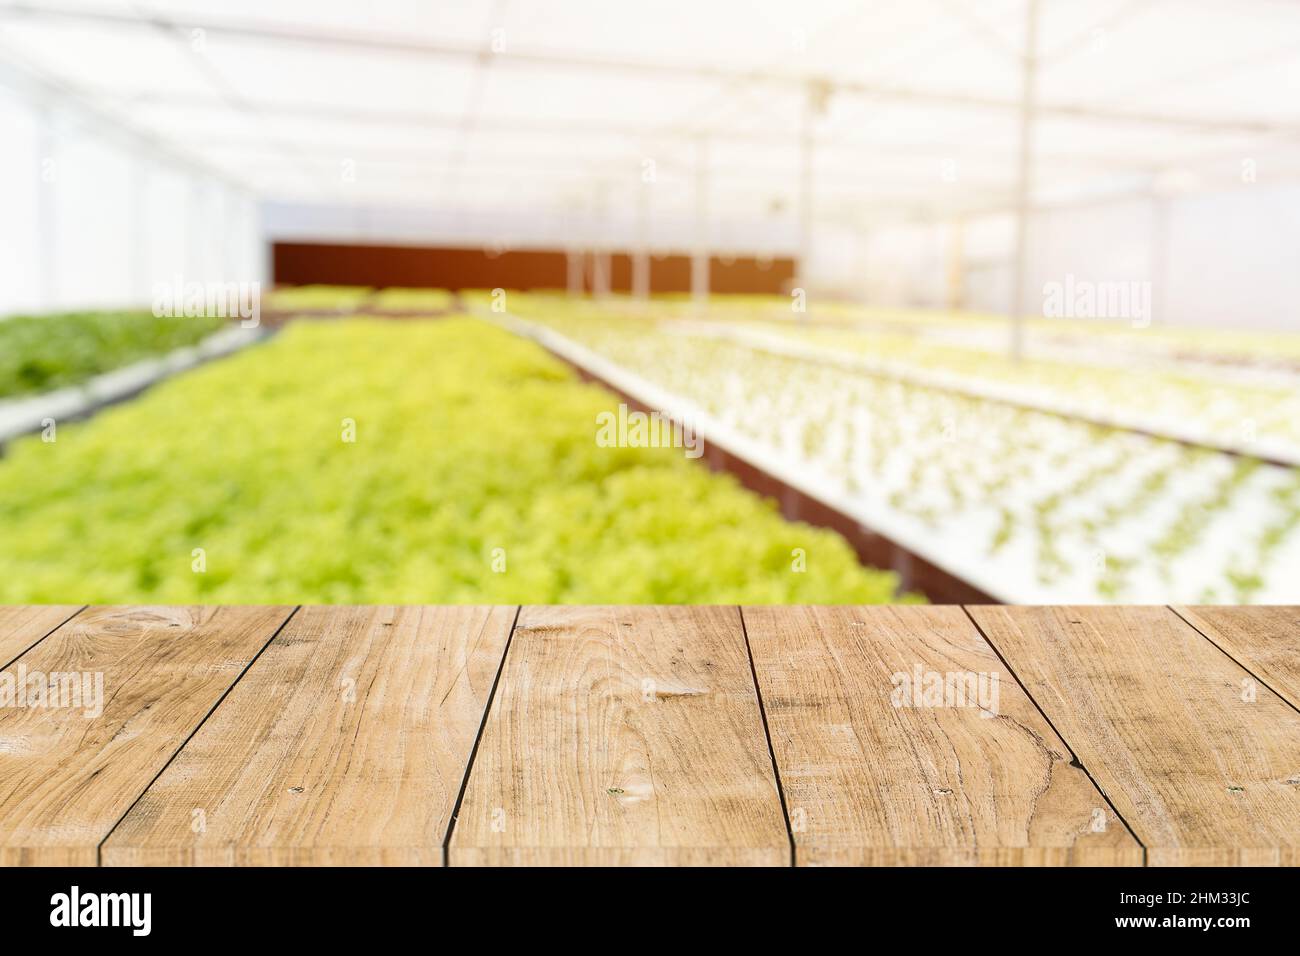 Hydroponics food plant farm blur with wooden table space for agriculture advertising montage background. Stock Photo